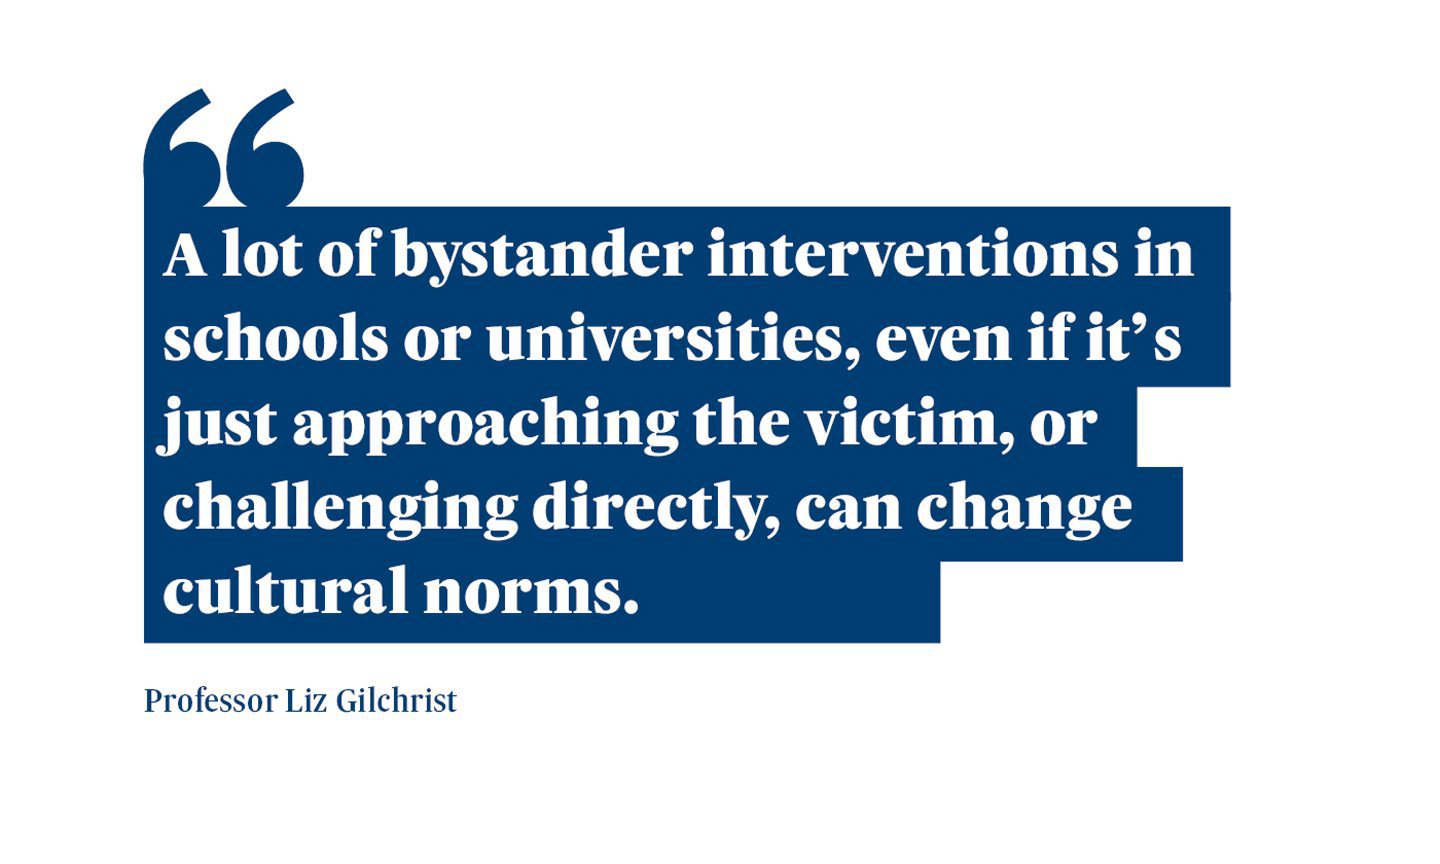 A quote from Professor Liz Gilchrist saying: “A lot of bystander interventions in schools or universities, even if it’s just approaching the victim, or challenging directly, can change cultural norms.”